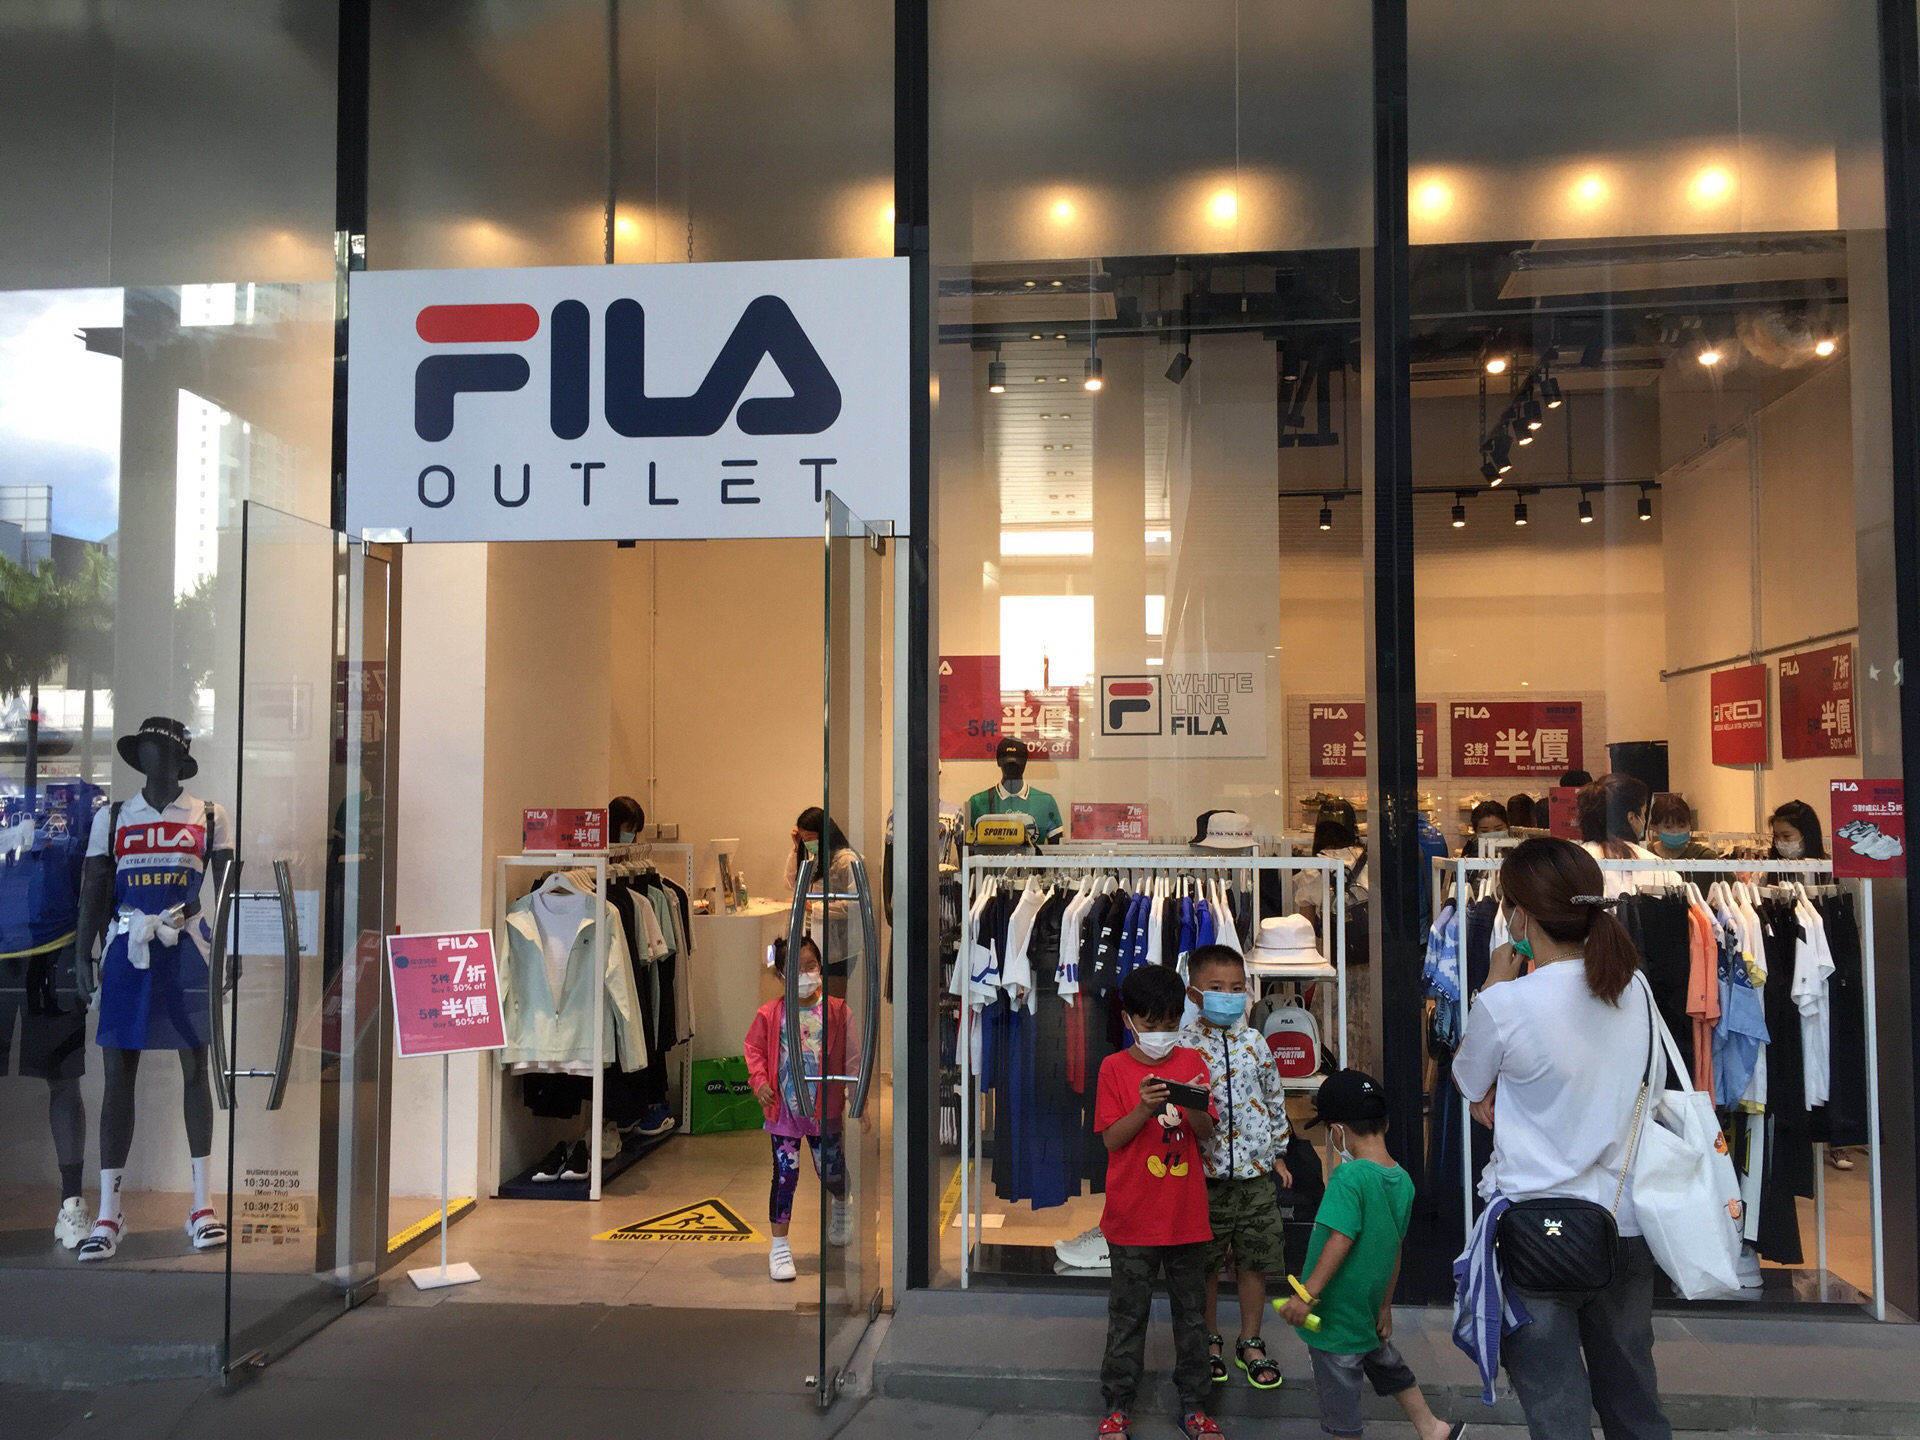 whisky vacío Firmar Fila Outlet travel guidebook –must visit attractions in Hong Kong – Fila  Outlet nearby recommendation – Trip.com